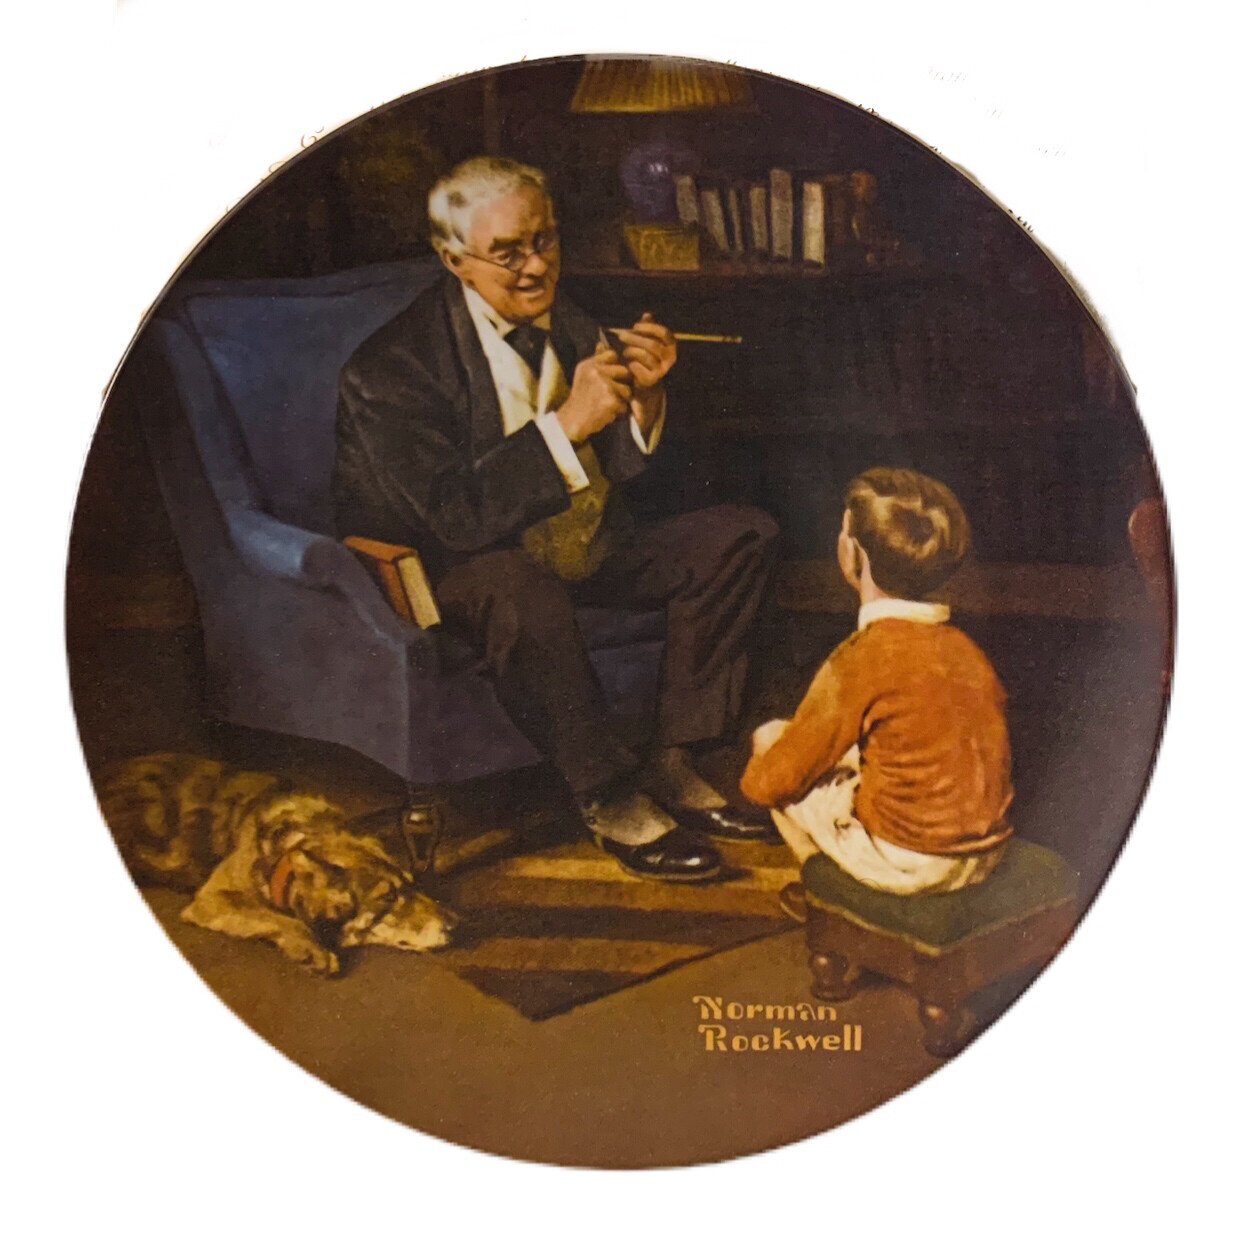 Norman Rockwell  “The Tycoon” Collectors China